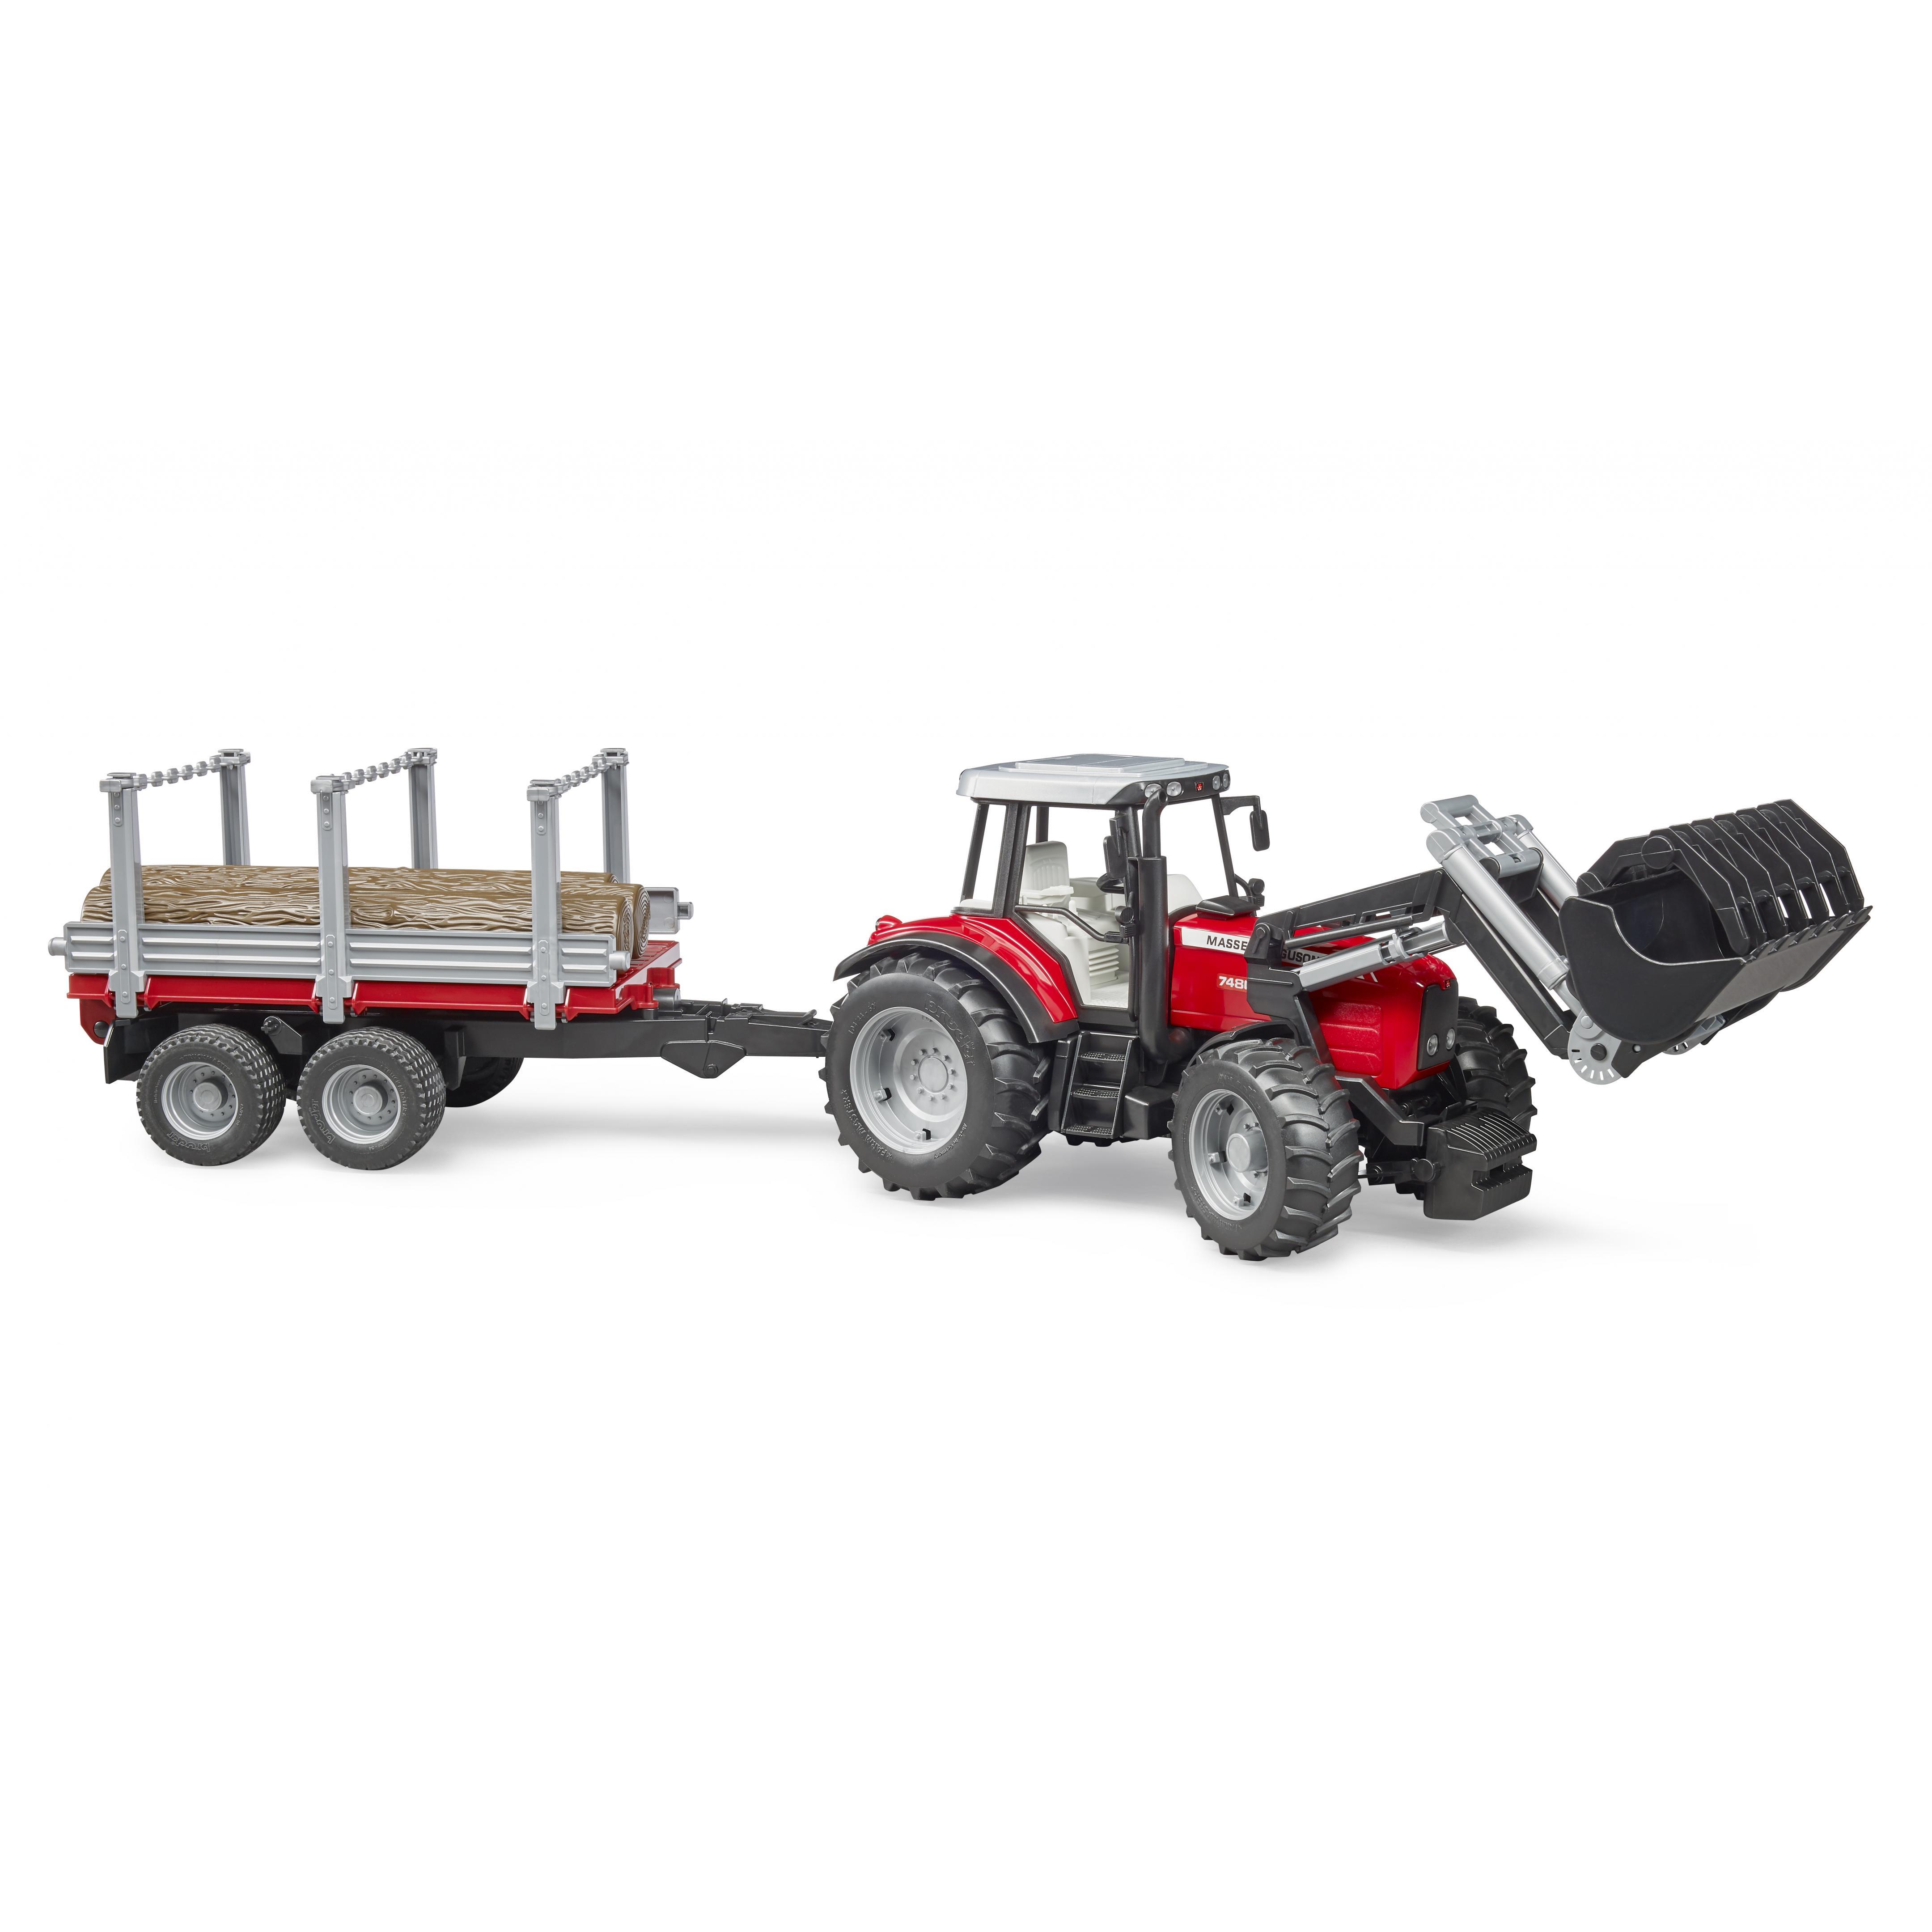 Bruder 02046 Massey 7480 Tractor With Frontloader, Timber Trailer And Logs Toymaster Ballina